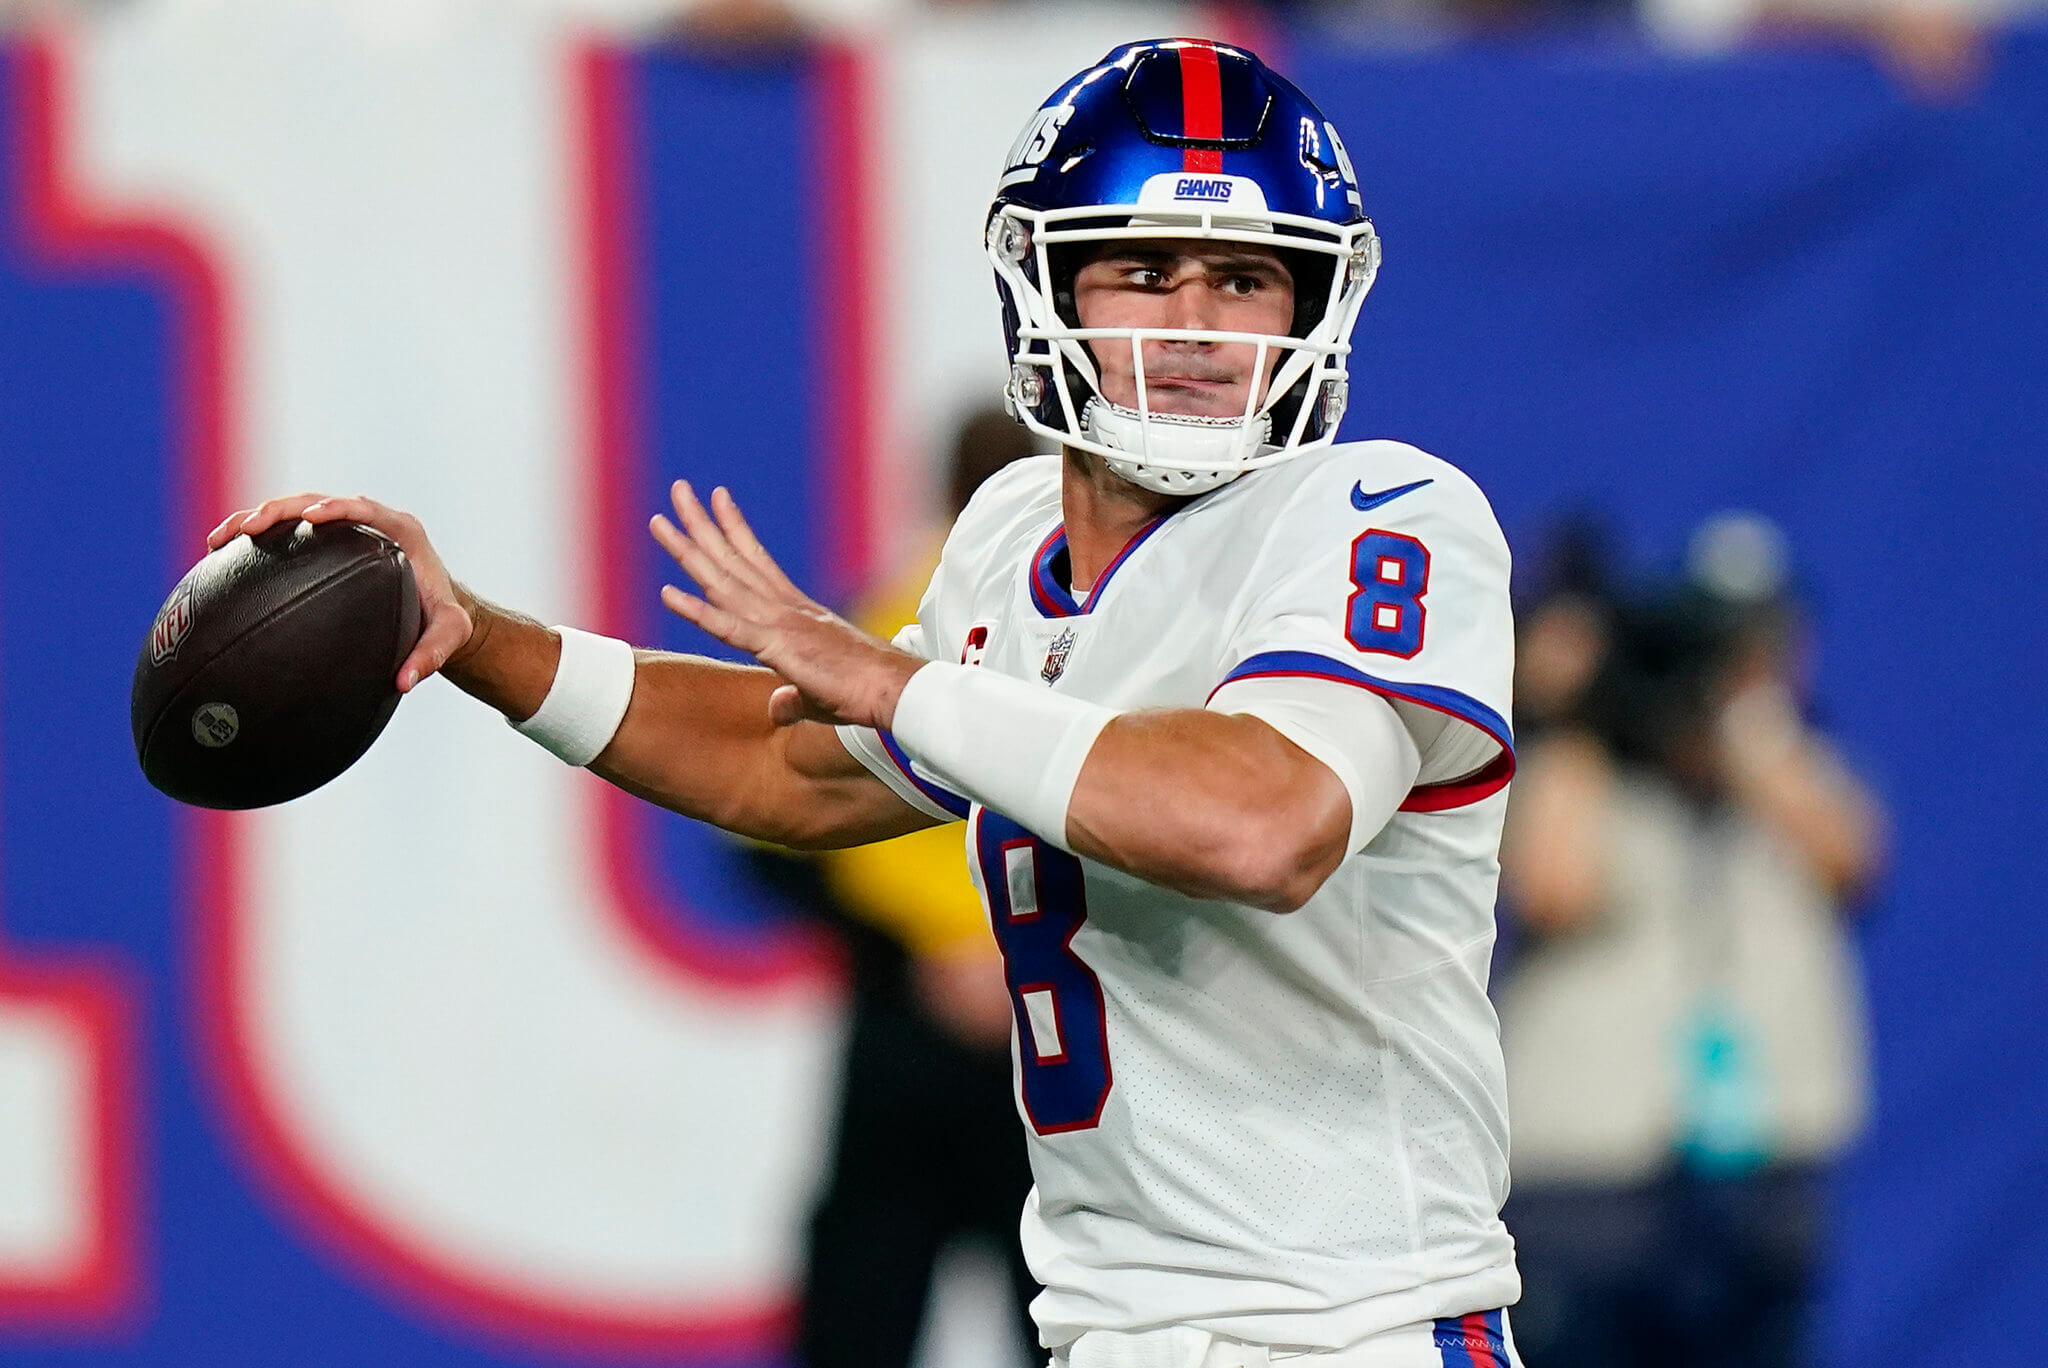 Giants' starters including Daniel Jones likely to see extensive